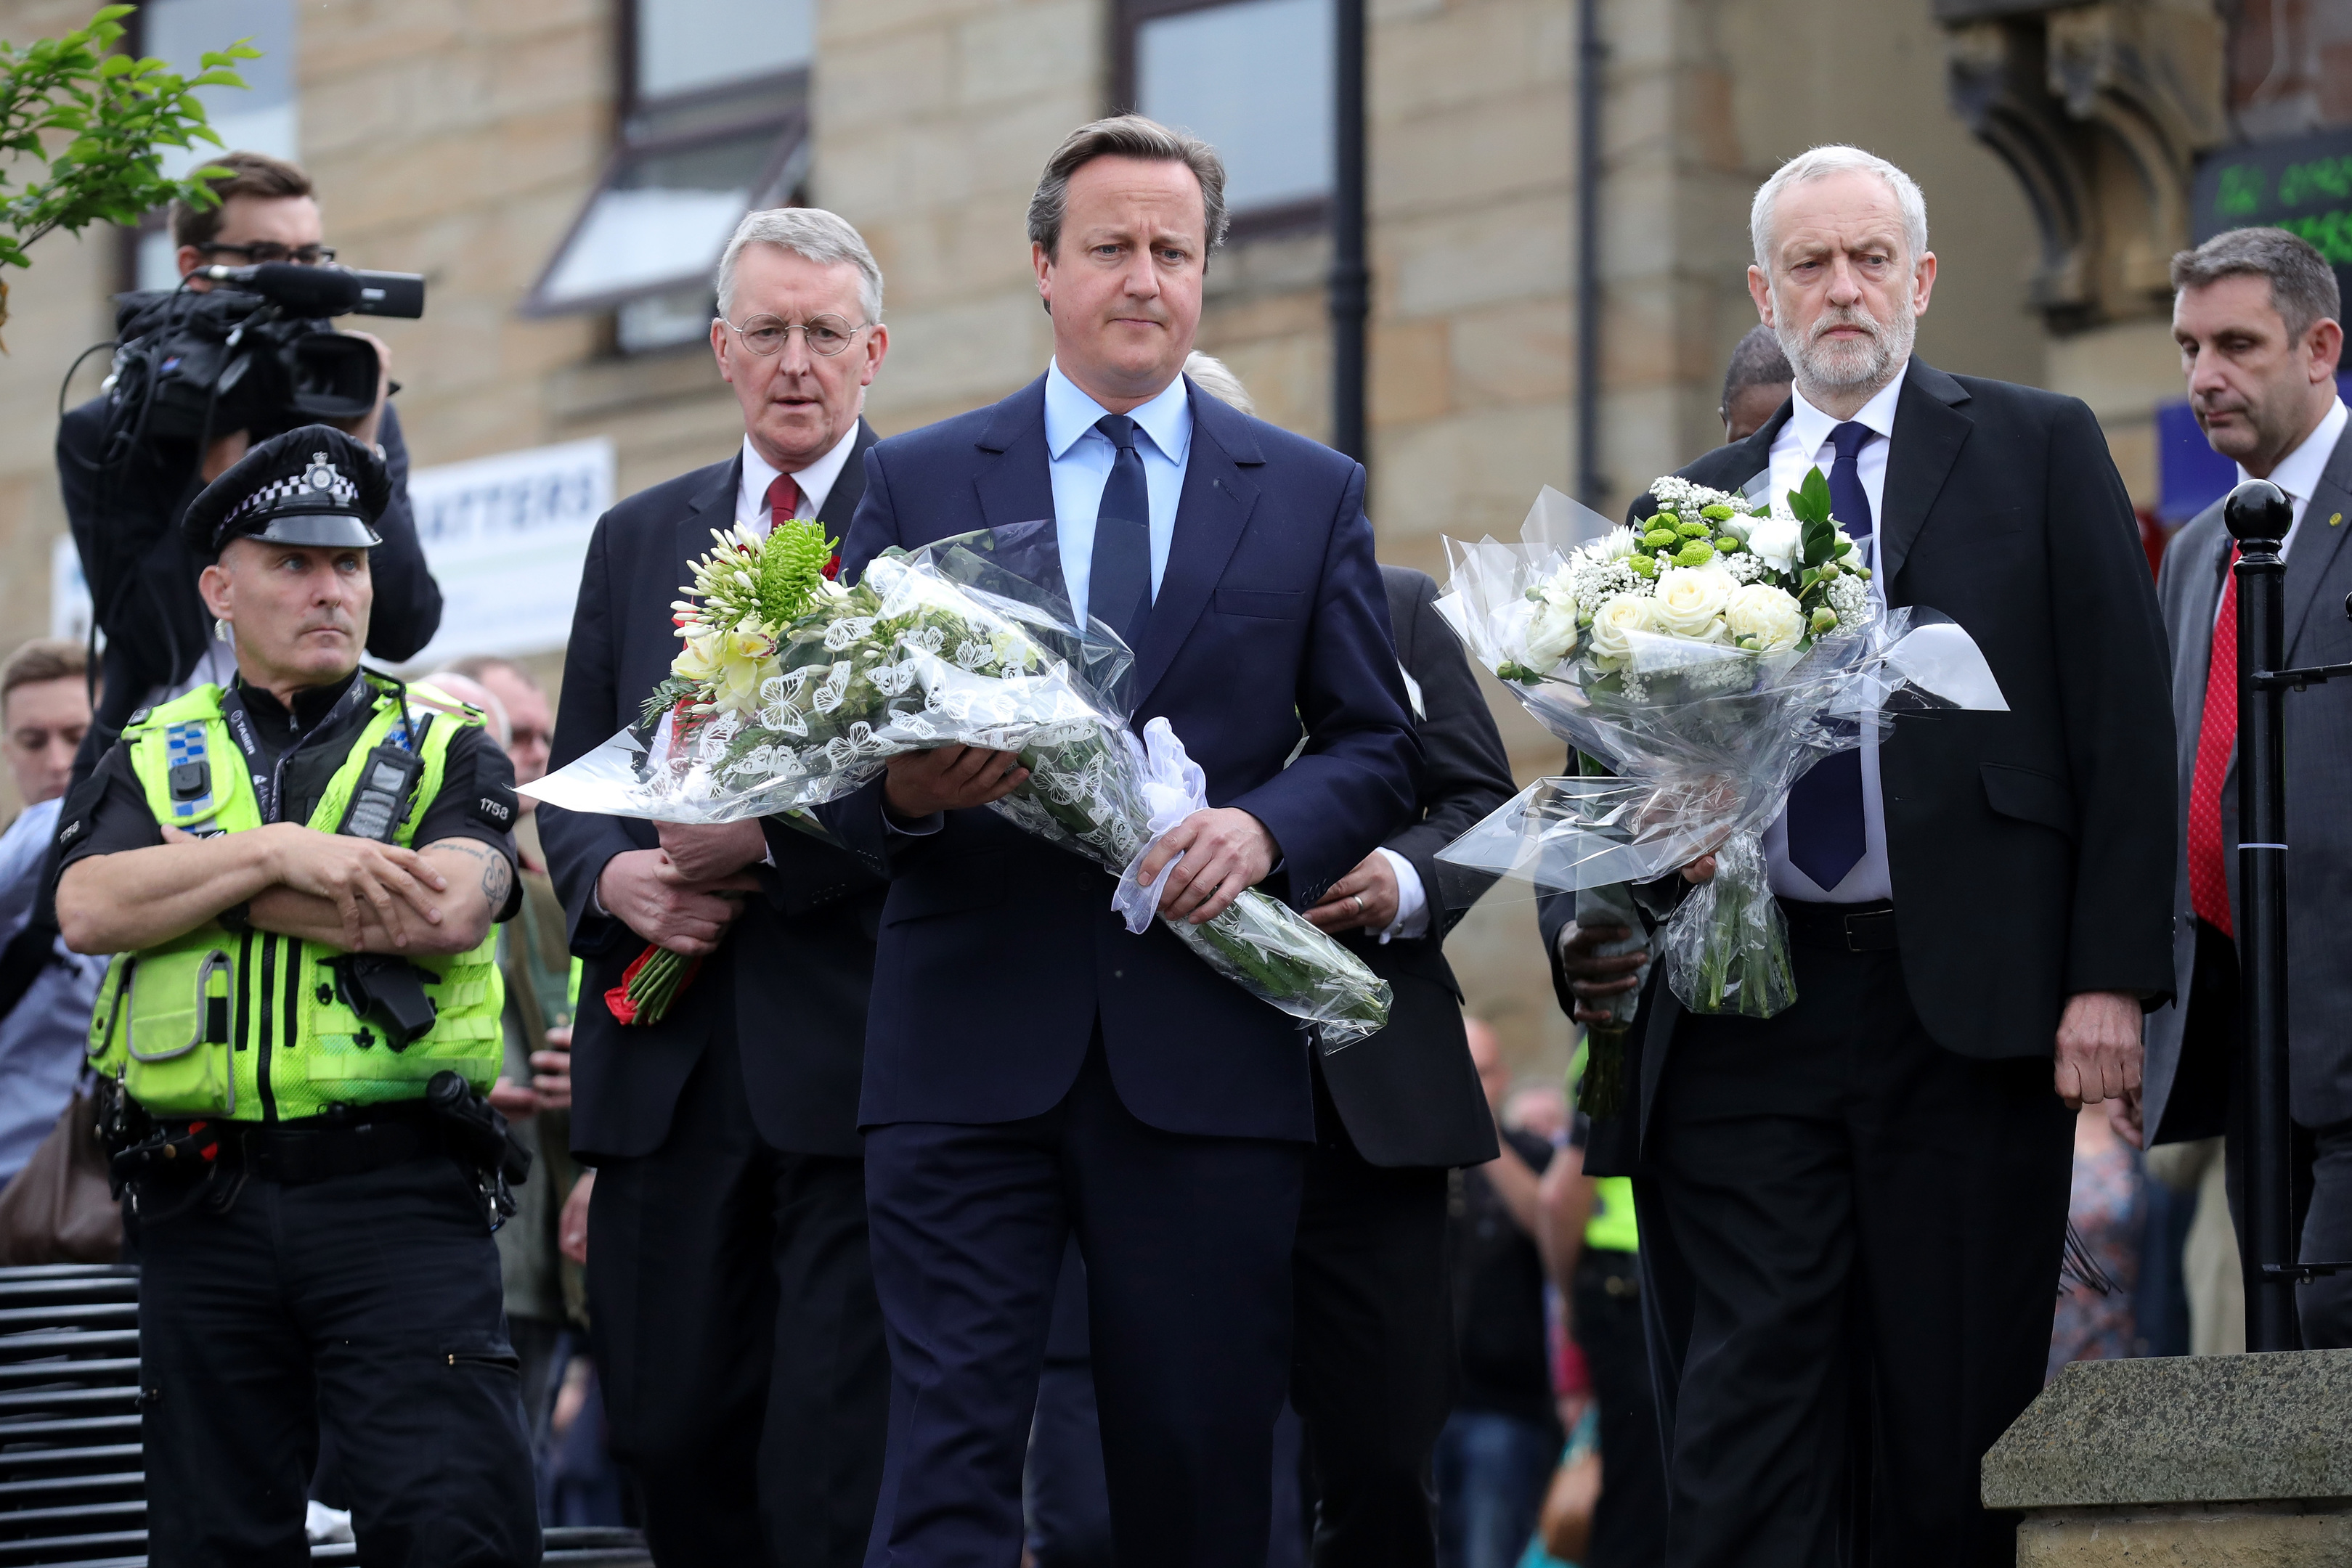 Prime Minister David Cameron and Labour Leader Jeremy Corbyn arrive to pay their respects at the scene of the murder of Jo Cox, 41, Labour MP for Batley and Spen, who was shot and stabbed yesterday at her constituency surgery (Christopher Furlong/Getty Images)